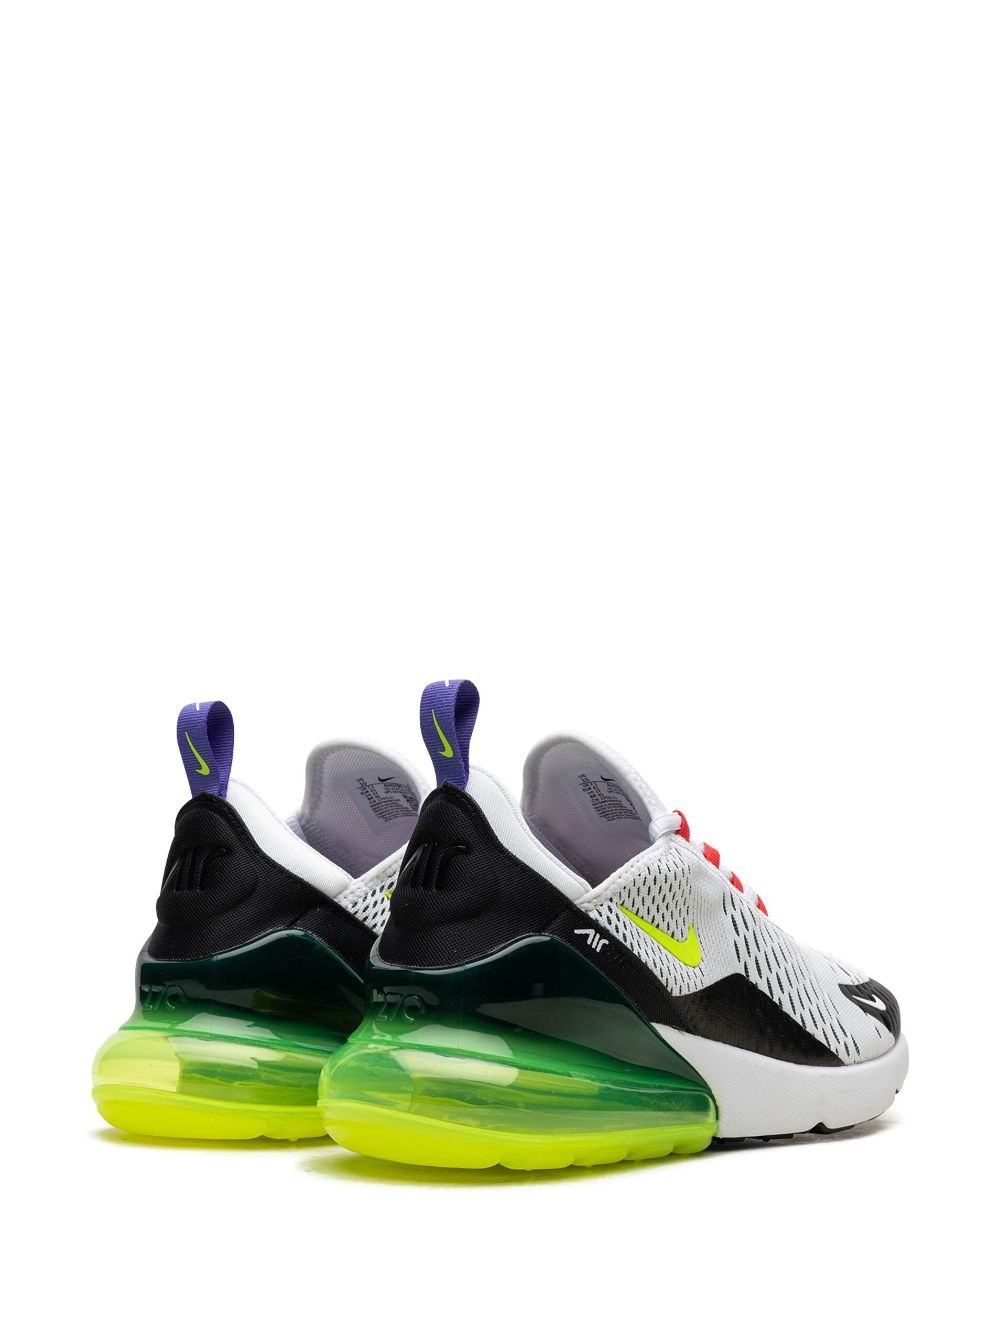 Air Max 270 "White/Volt/Siren Red" sneakers - 3